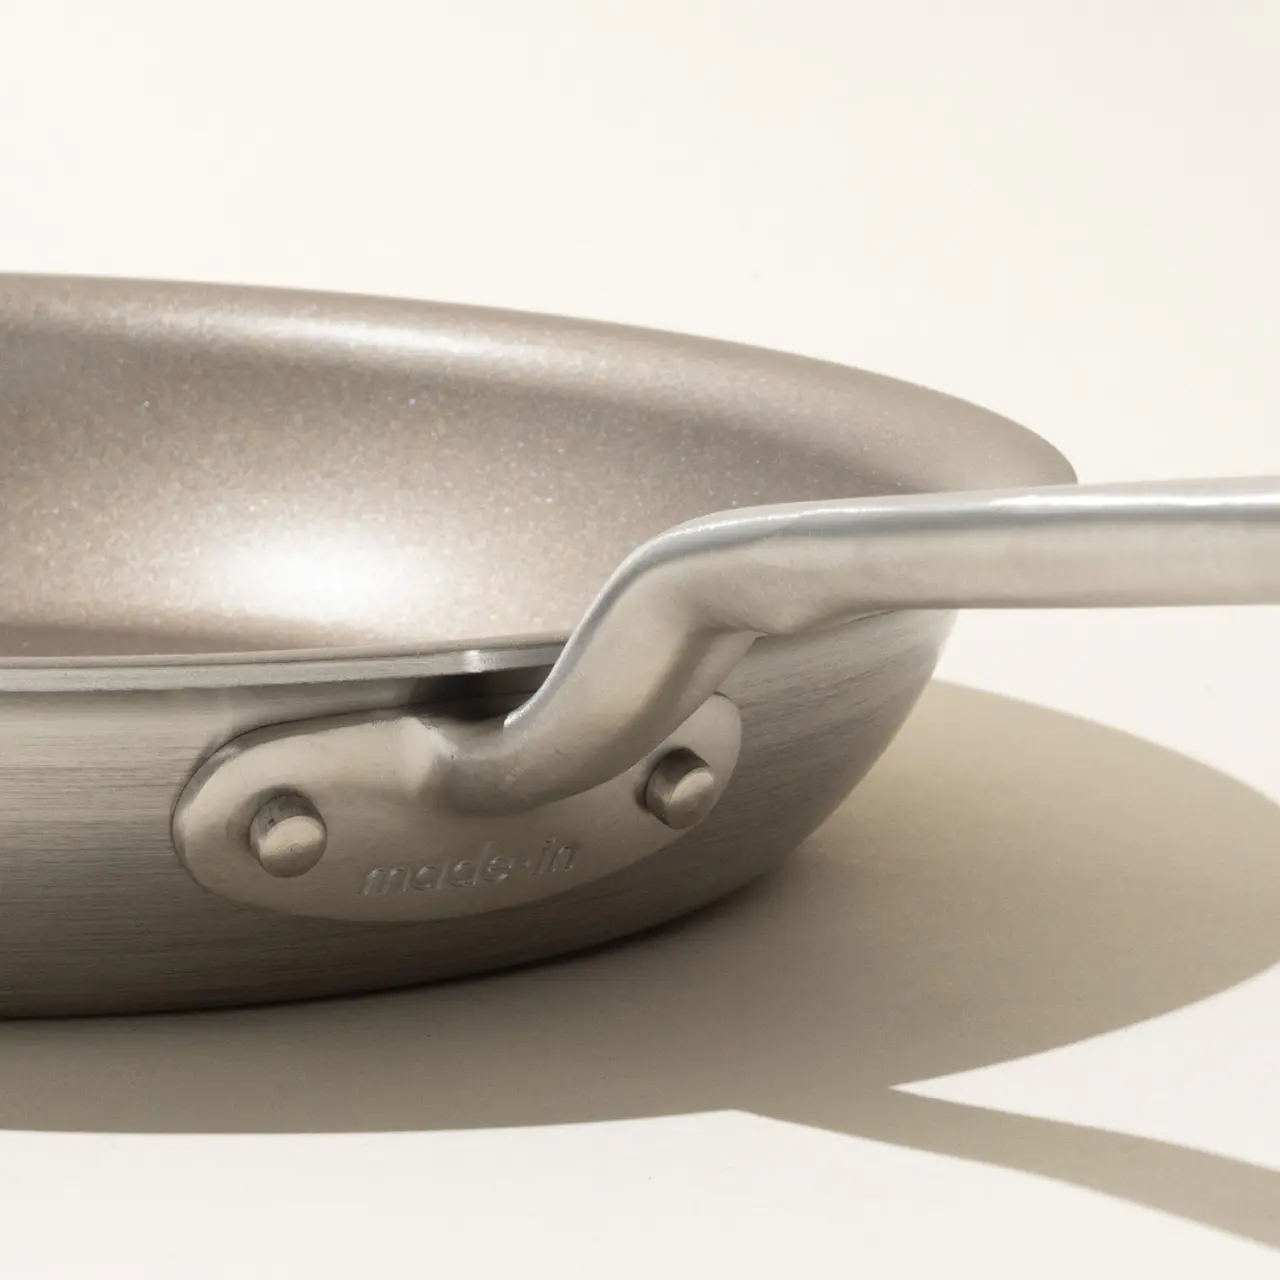 A close-up of a metallic frying pan focusing on its handle with the brand name visible and its shadow cast on the surface beneath it.